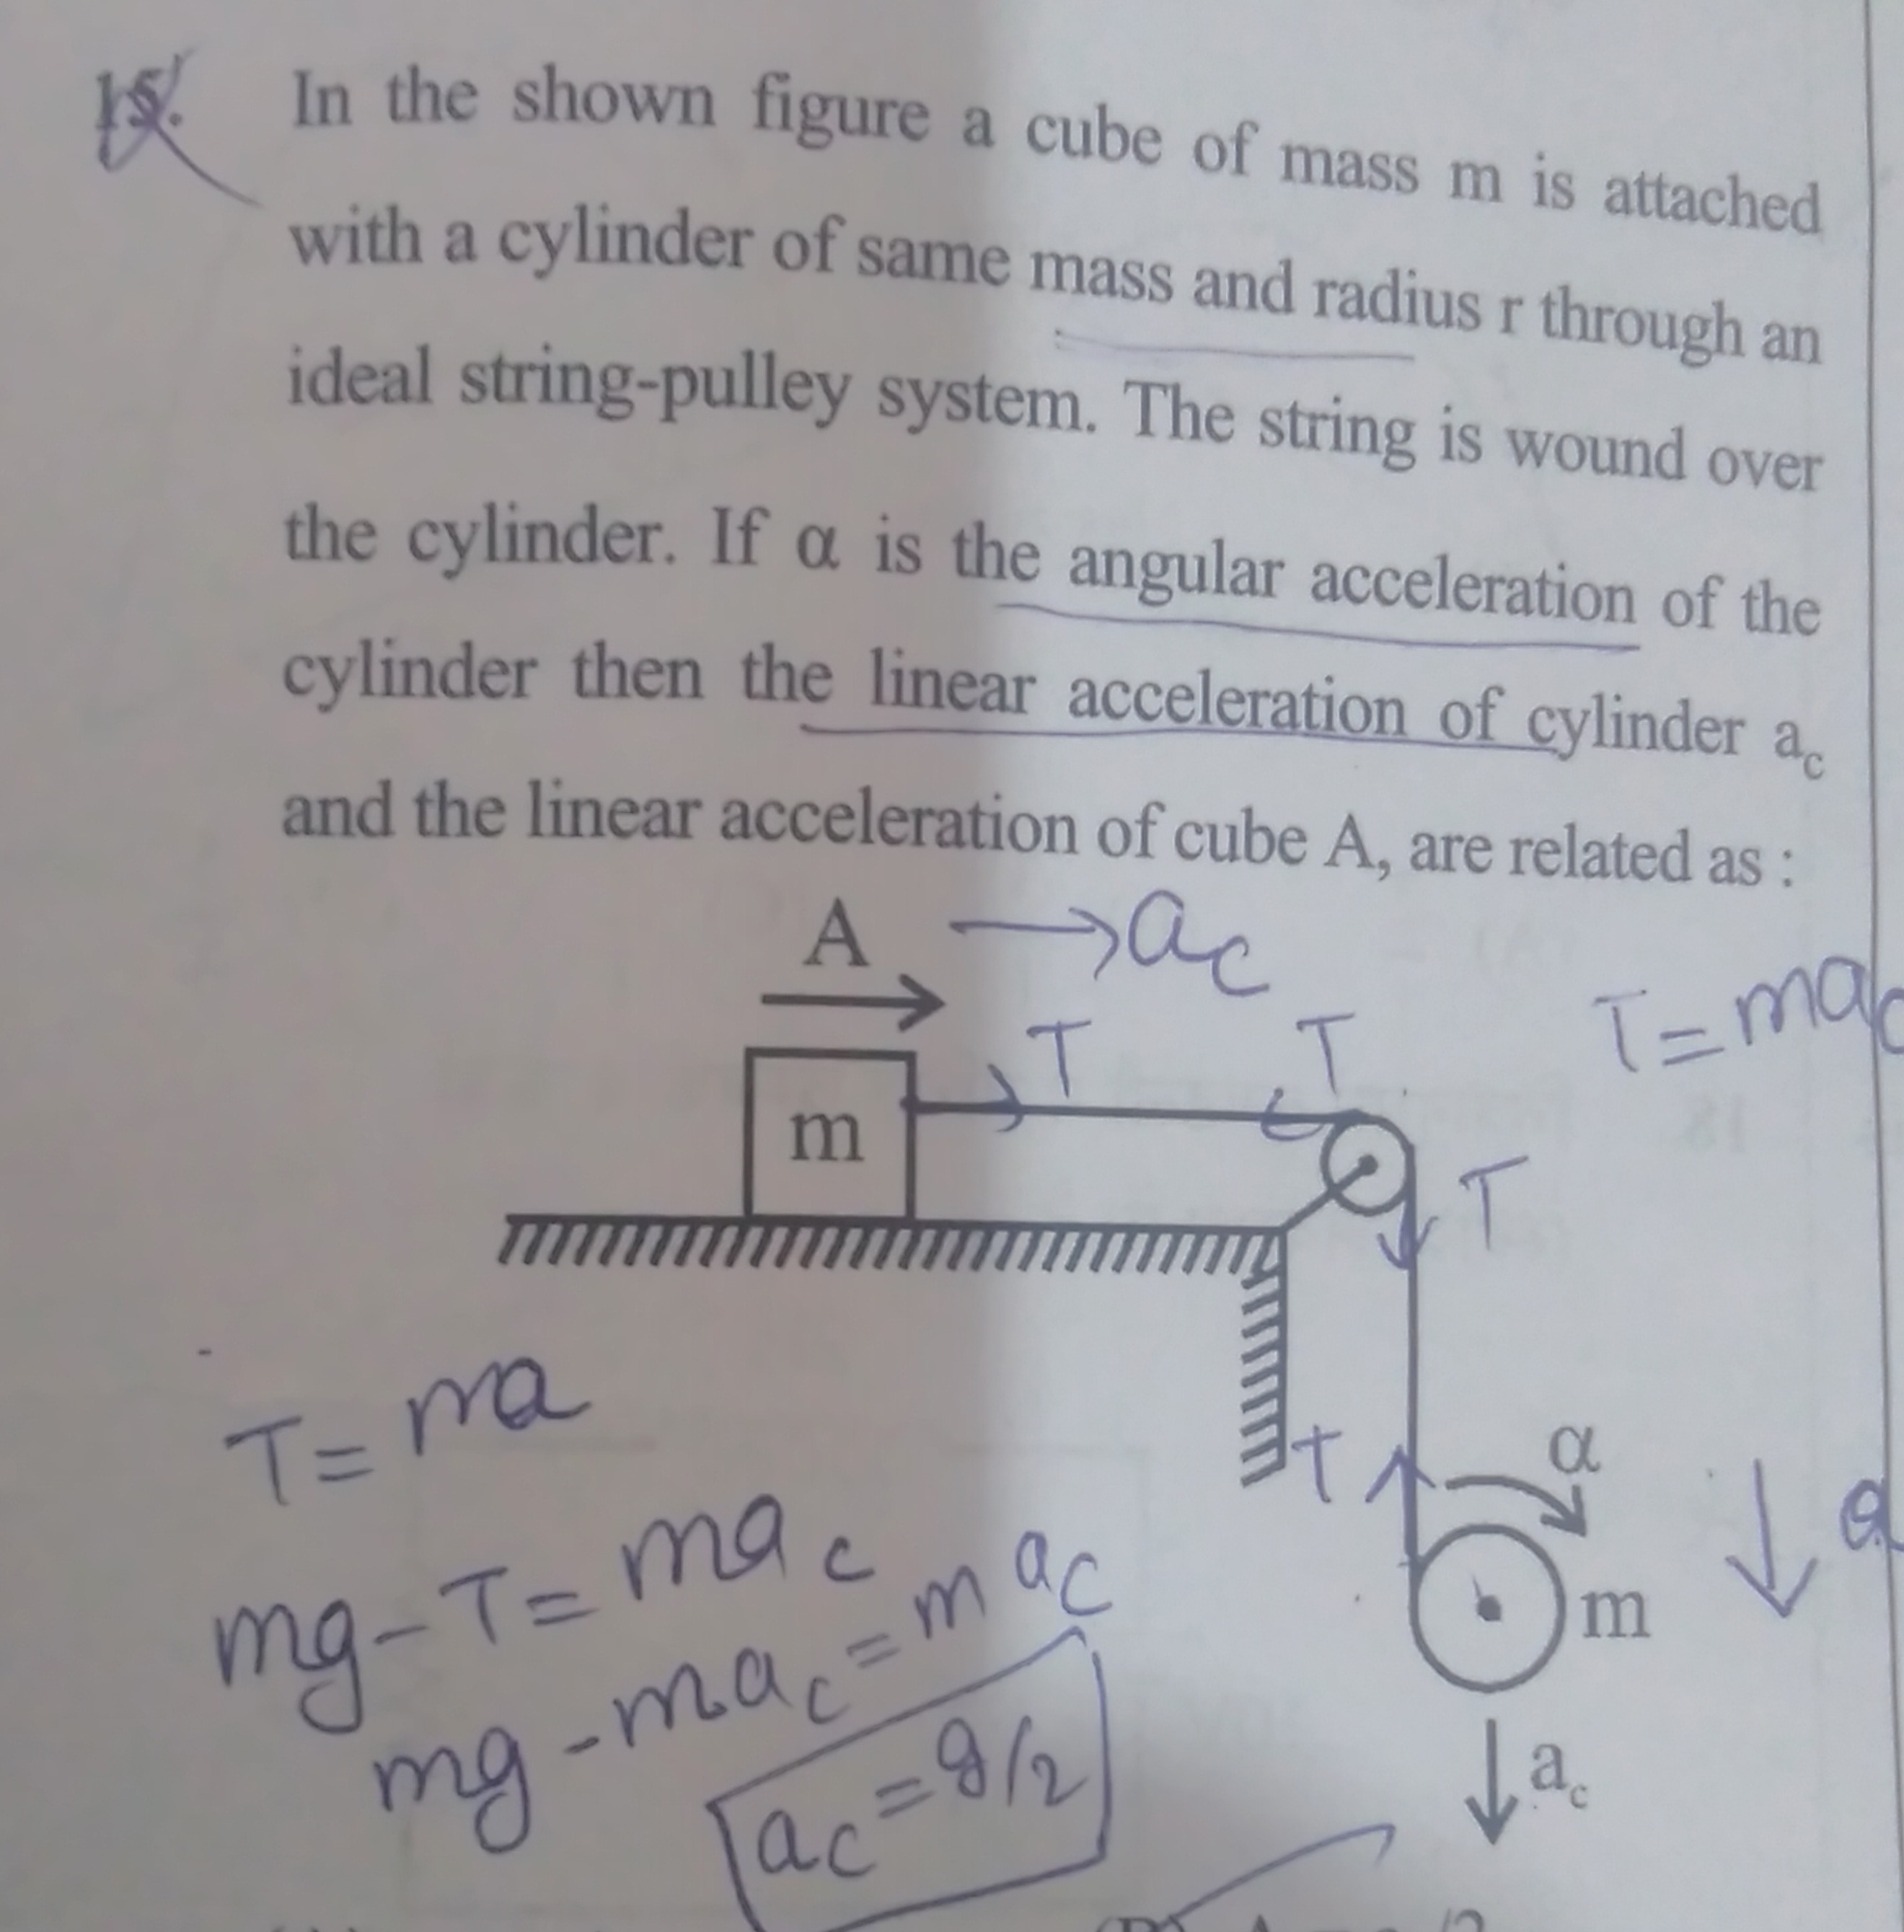 15. In the shown figure a cube of mass m is attached with a cylinder o